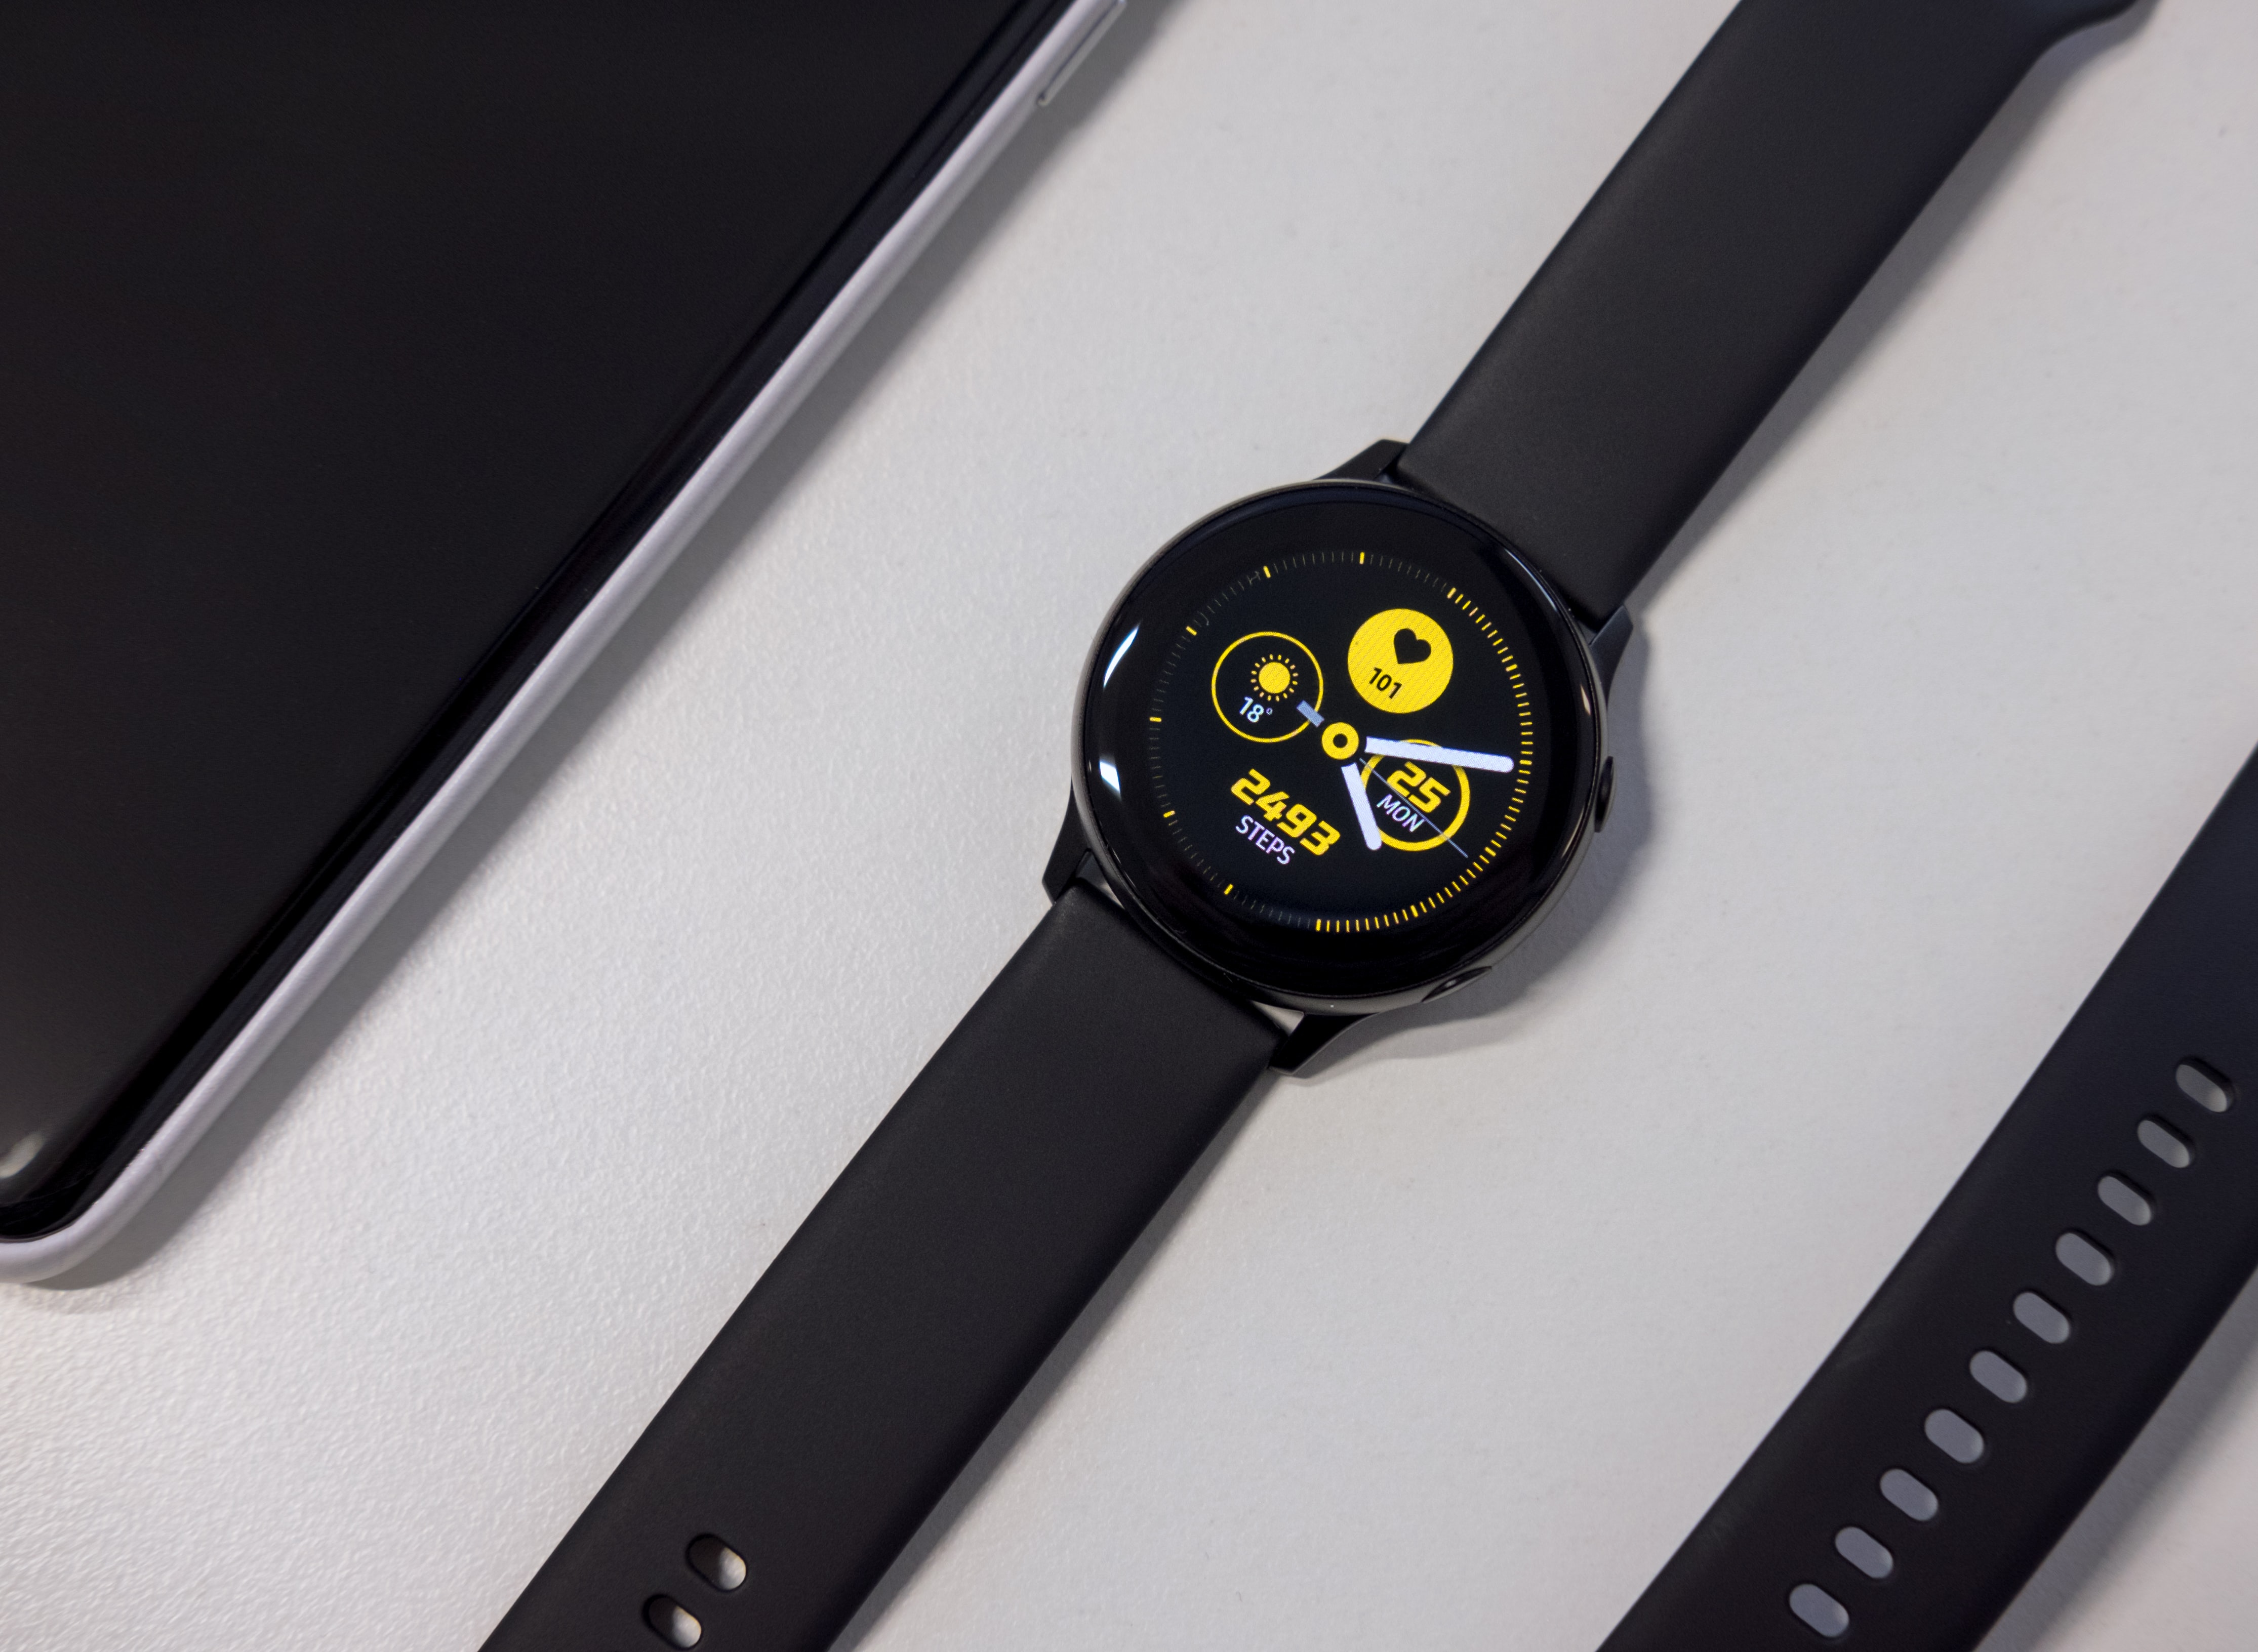 Wear OS Share Surges on Samsung’s Highest Quarterly Smartwatch Shipments in Q3 2021